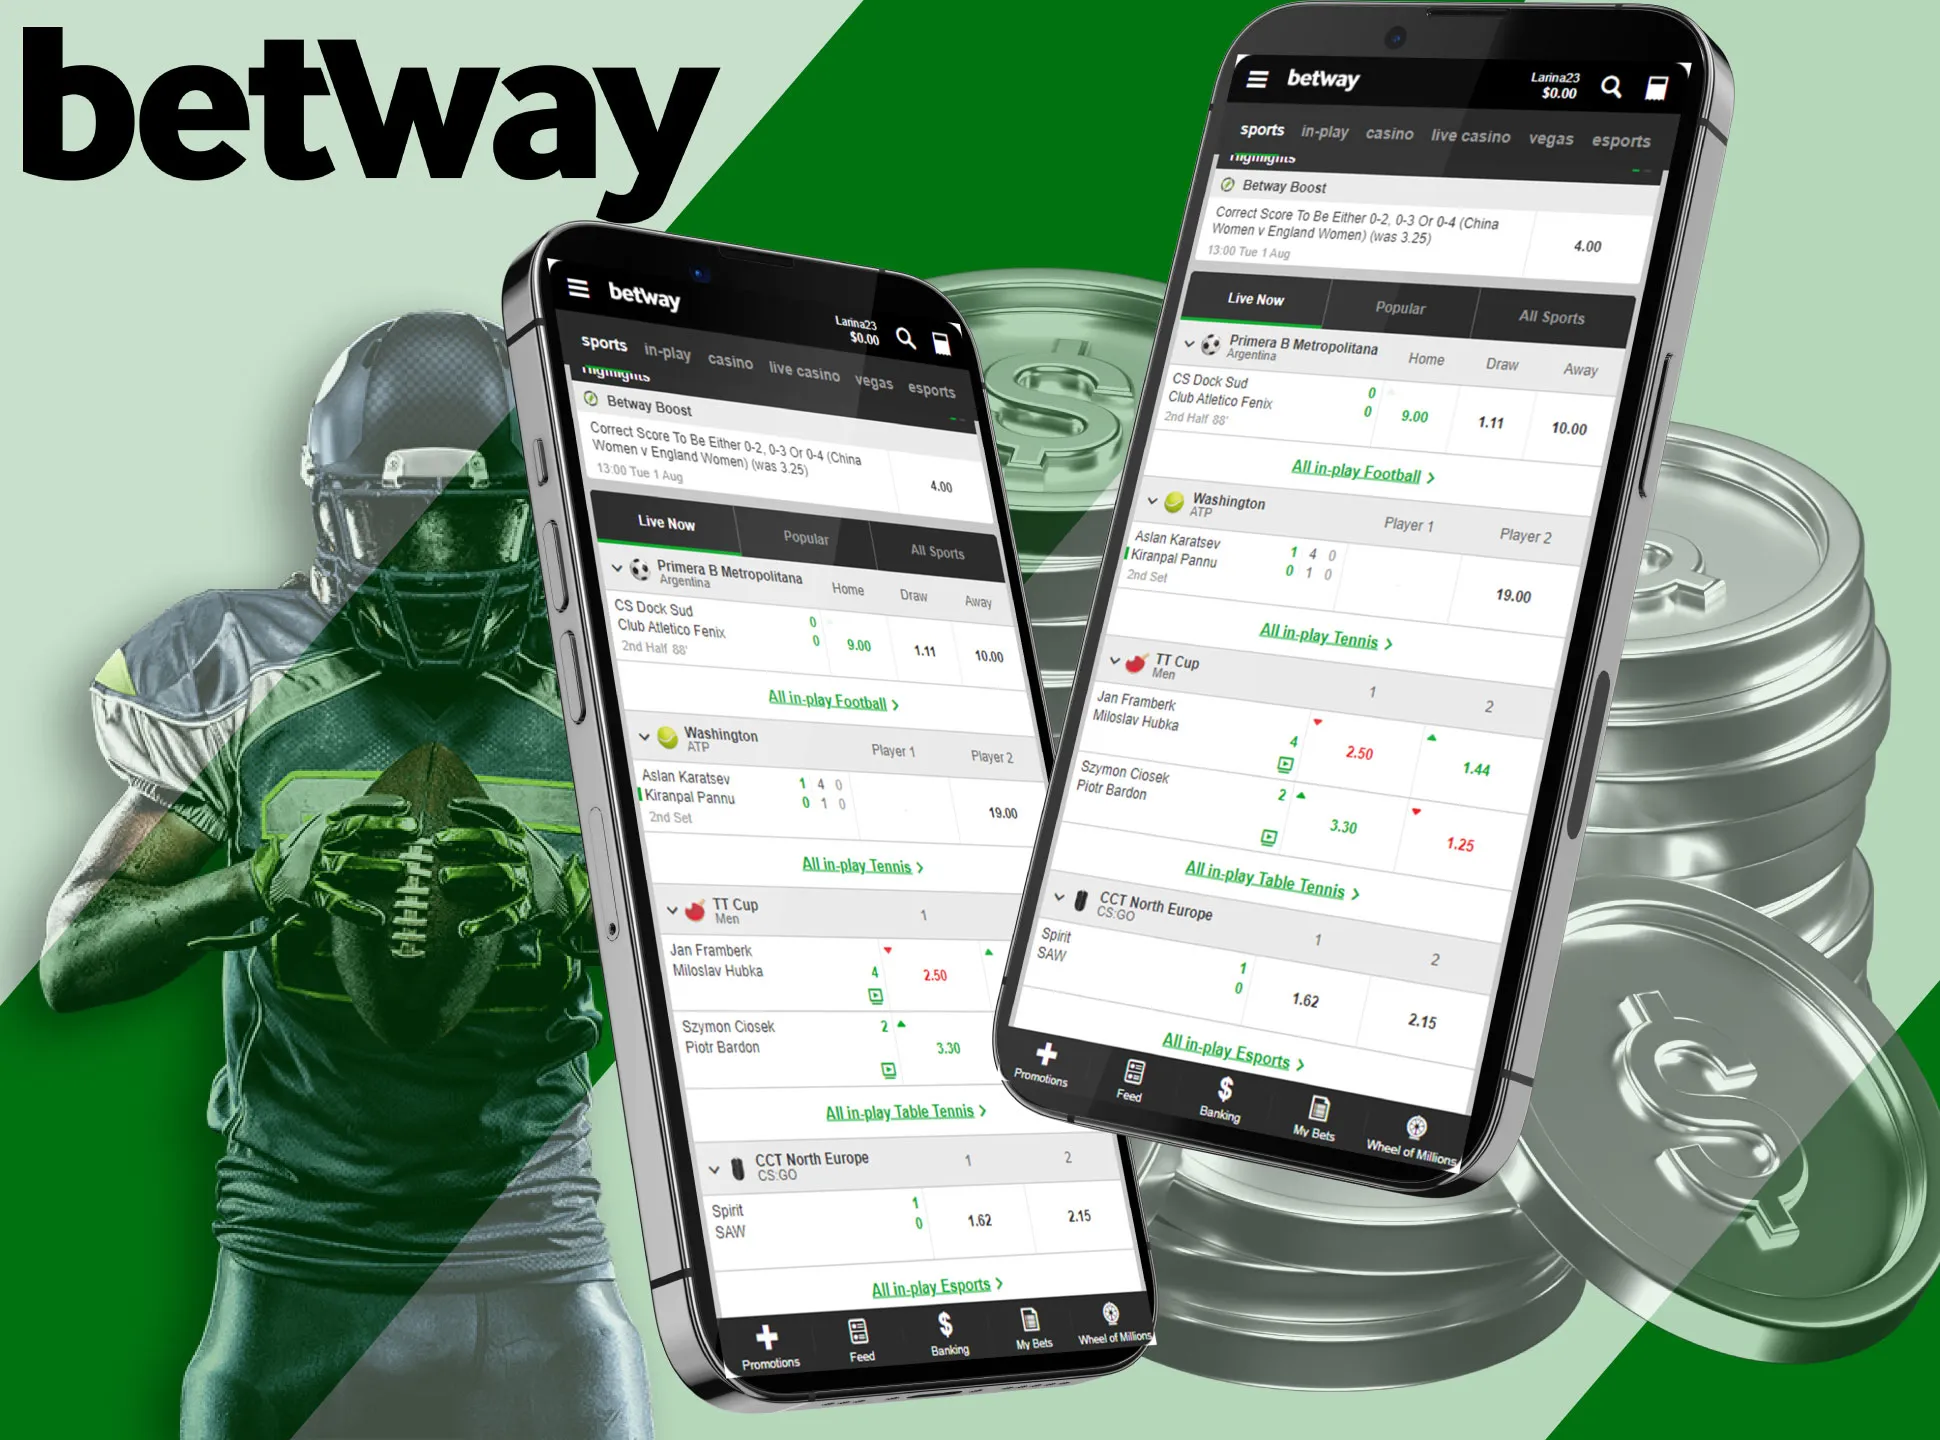 On the Betway app you can place single, express and live bets.